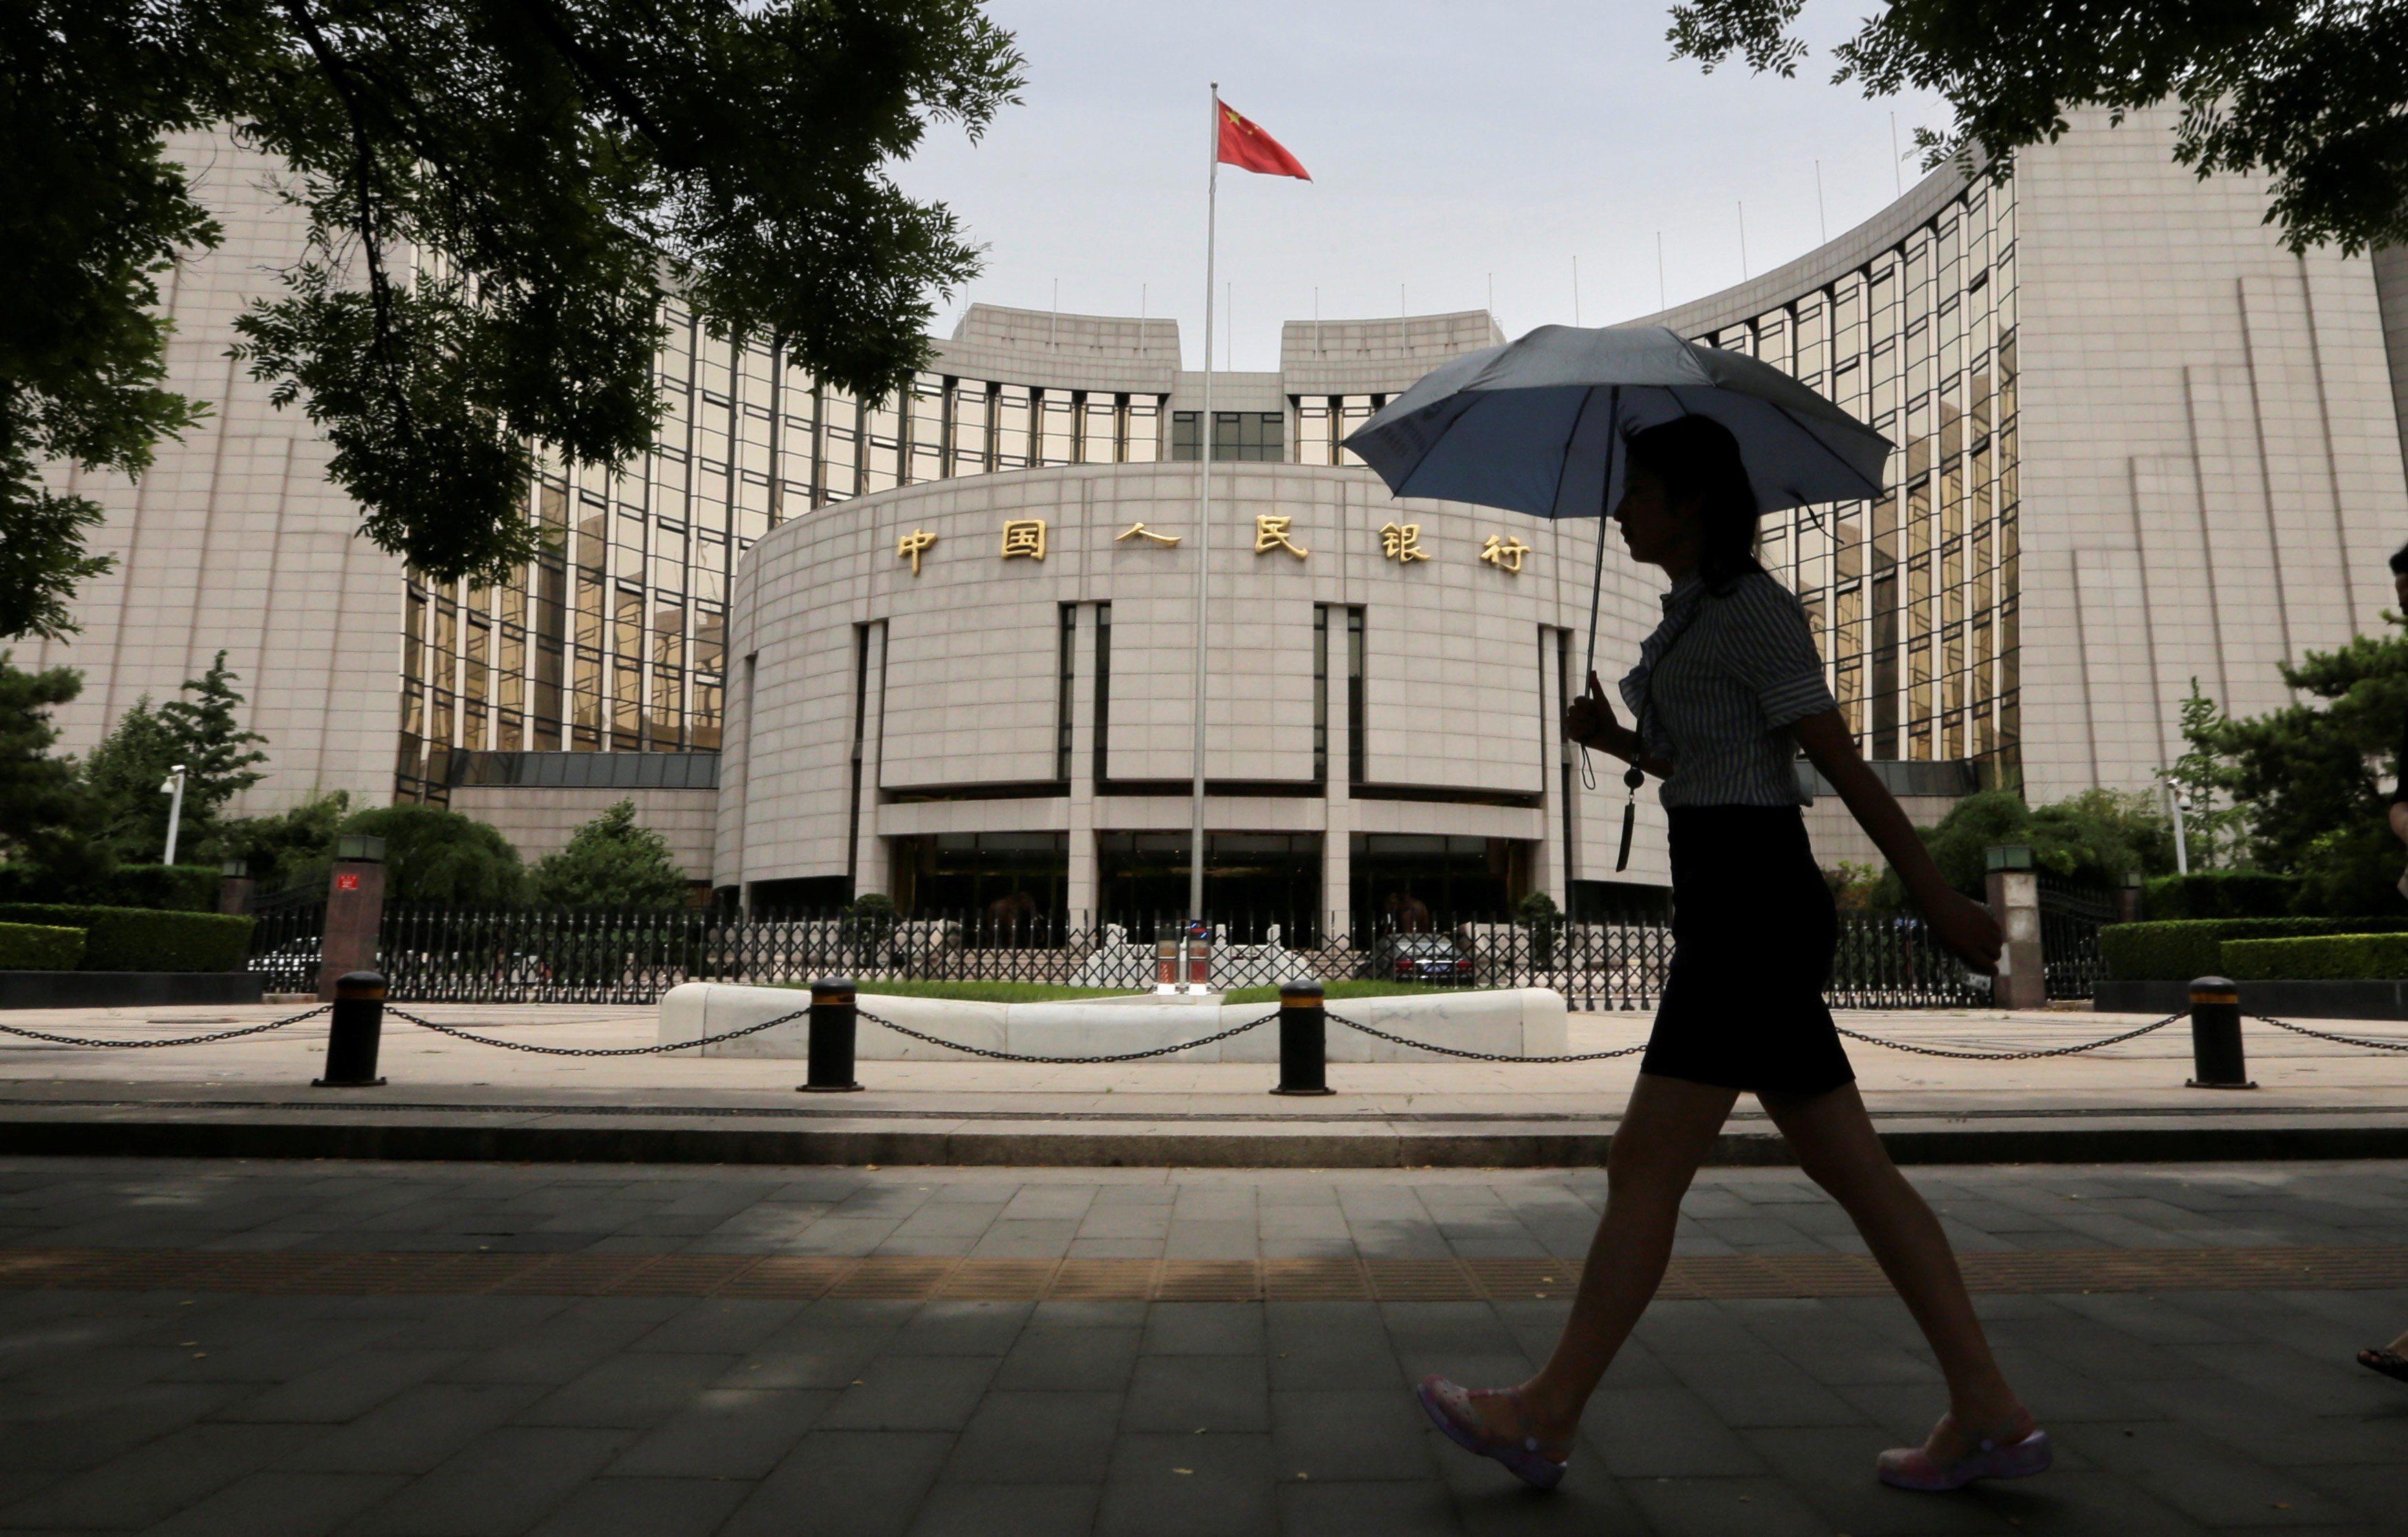 The new statistics platform is to measure all financial activity, from leveraged securities investment to local government borrowing, the People’s Bank of China said